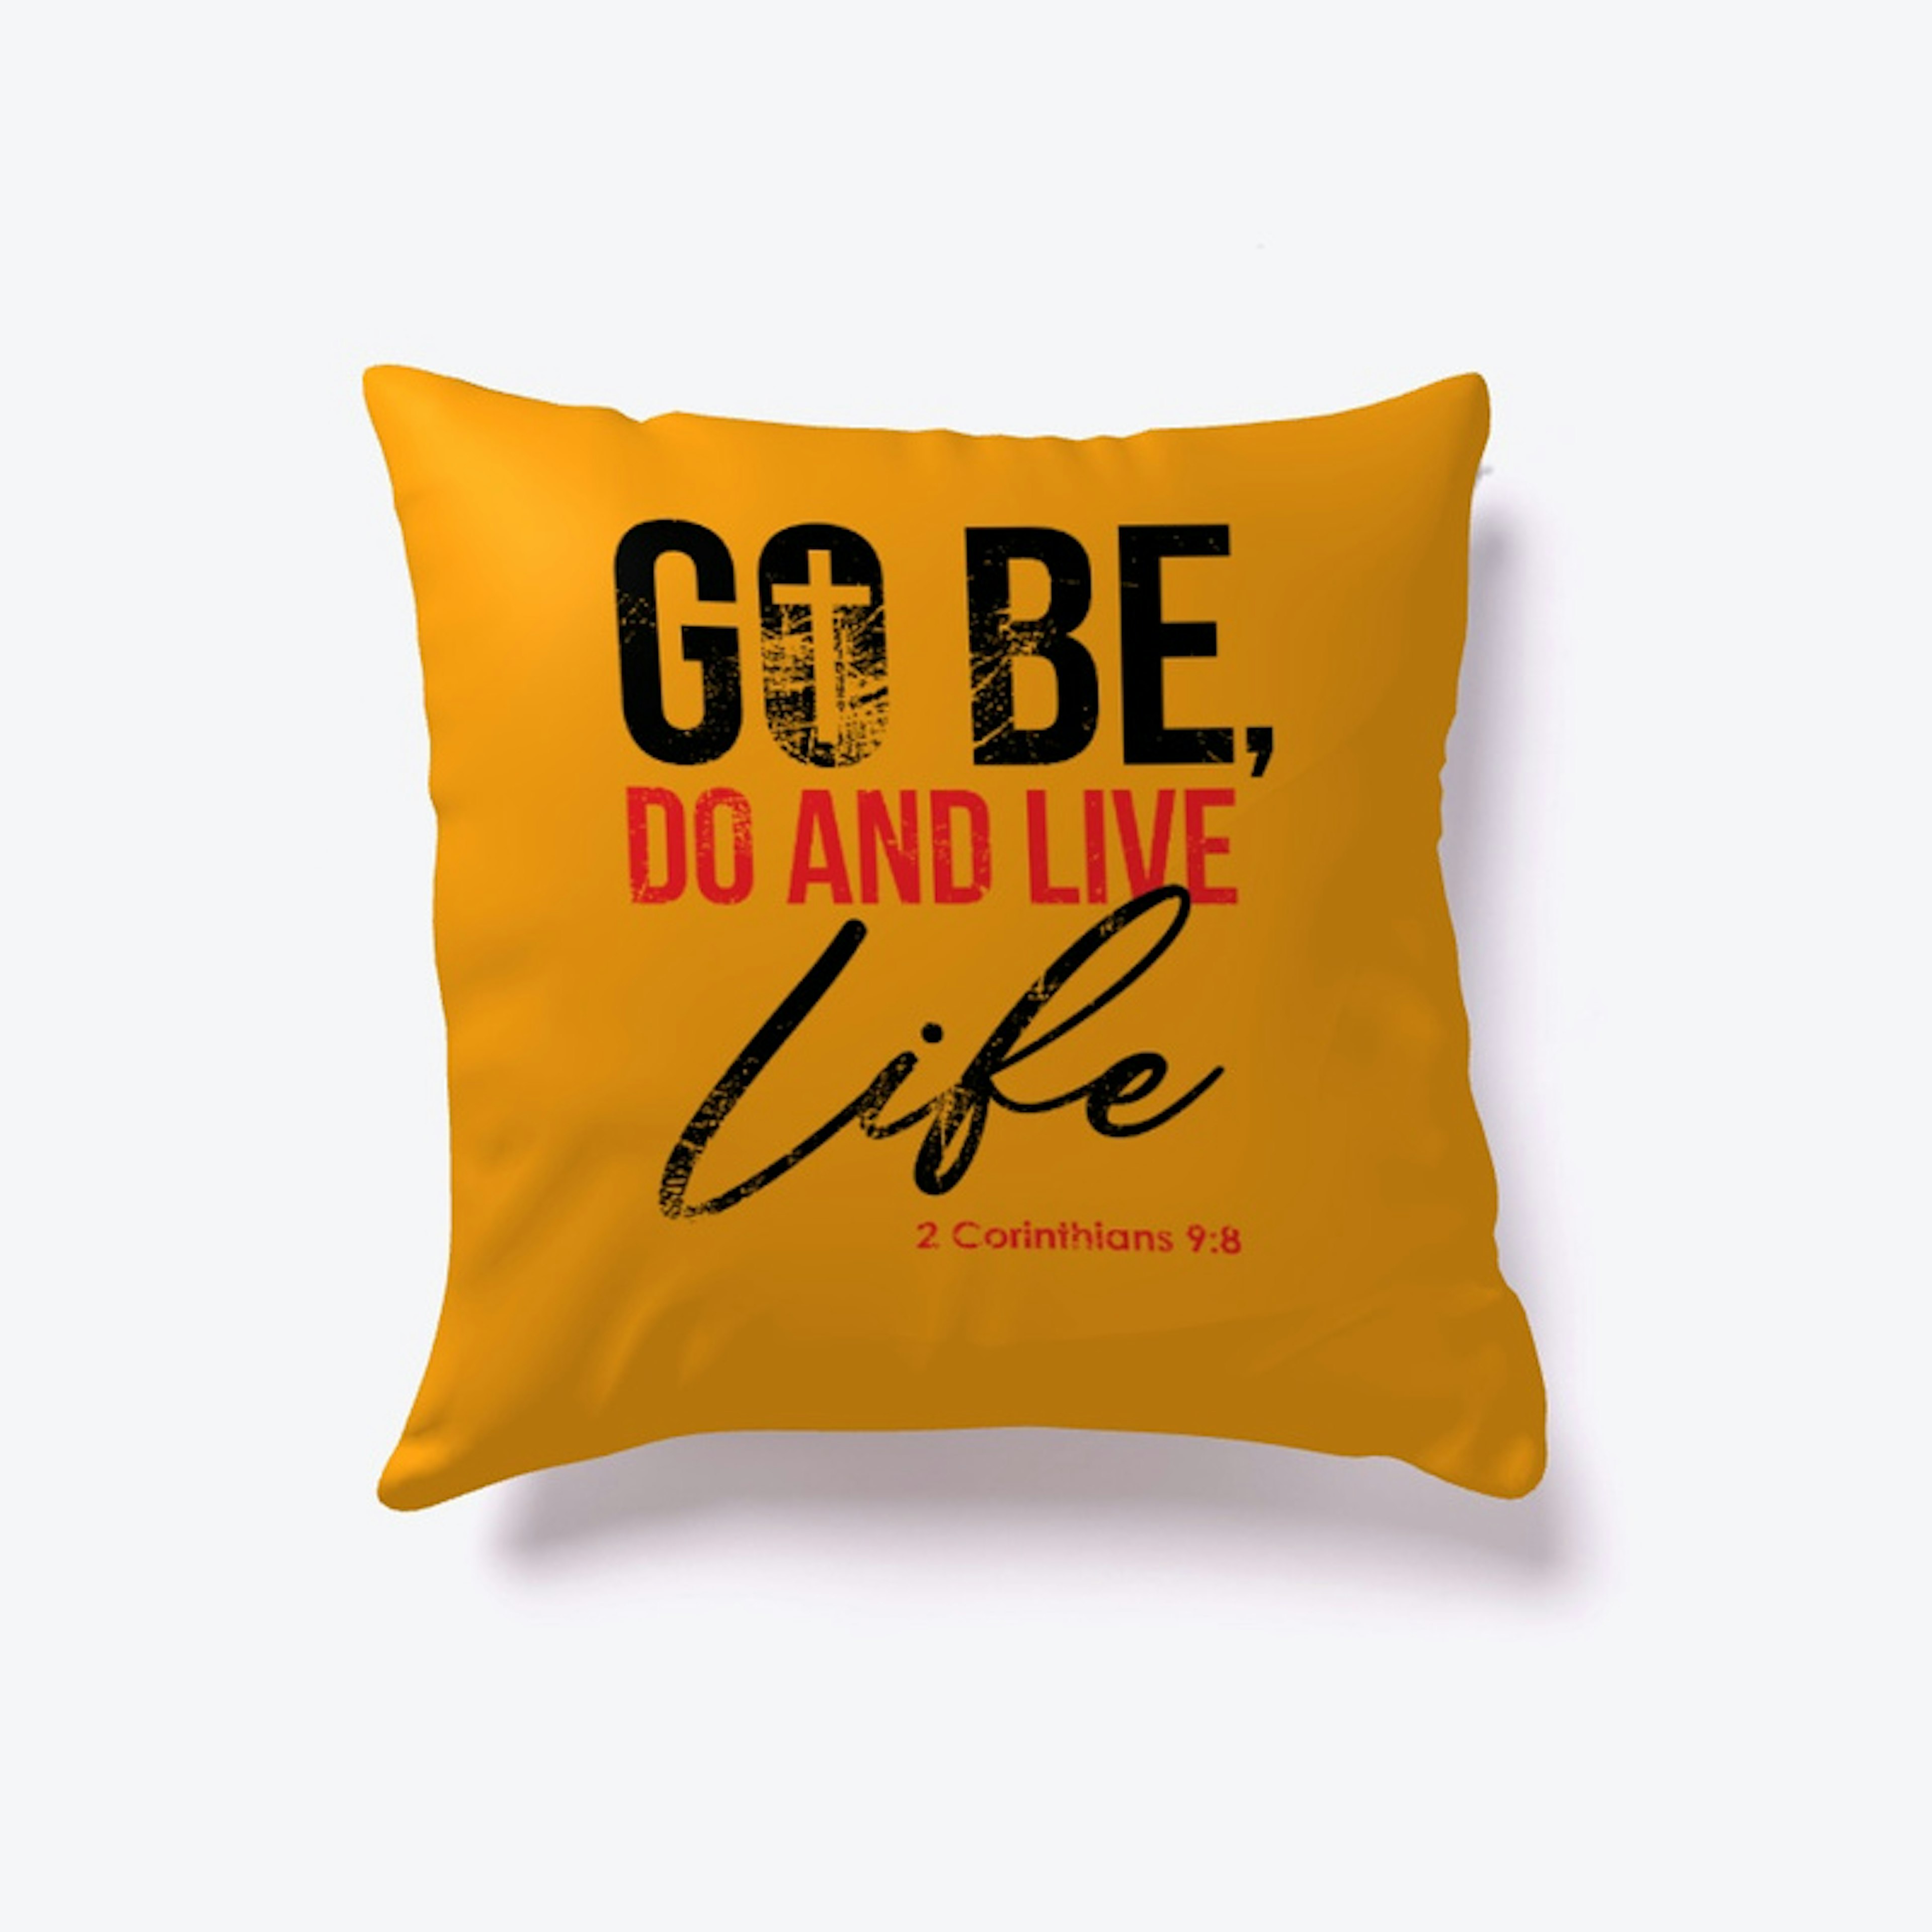 Go Be Do and Live Tee's and More